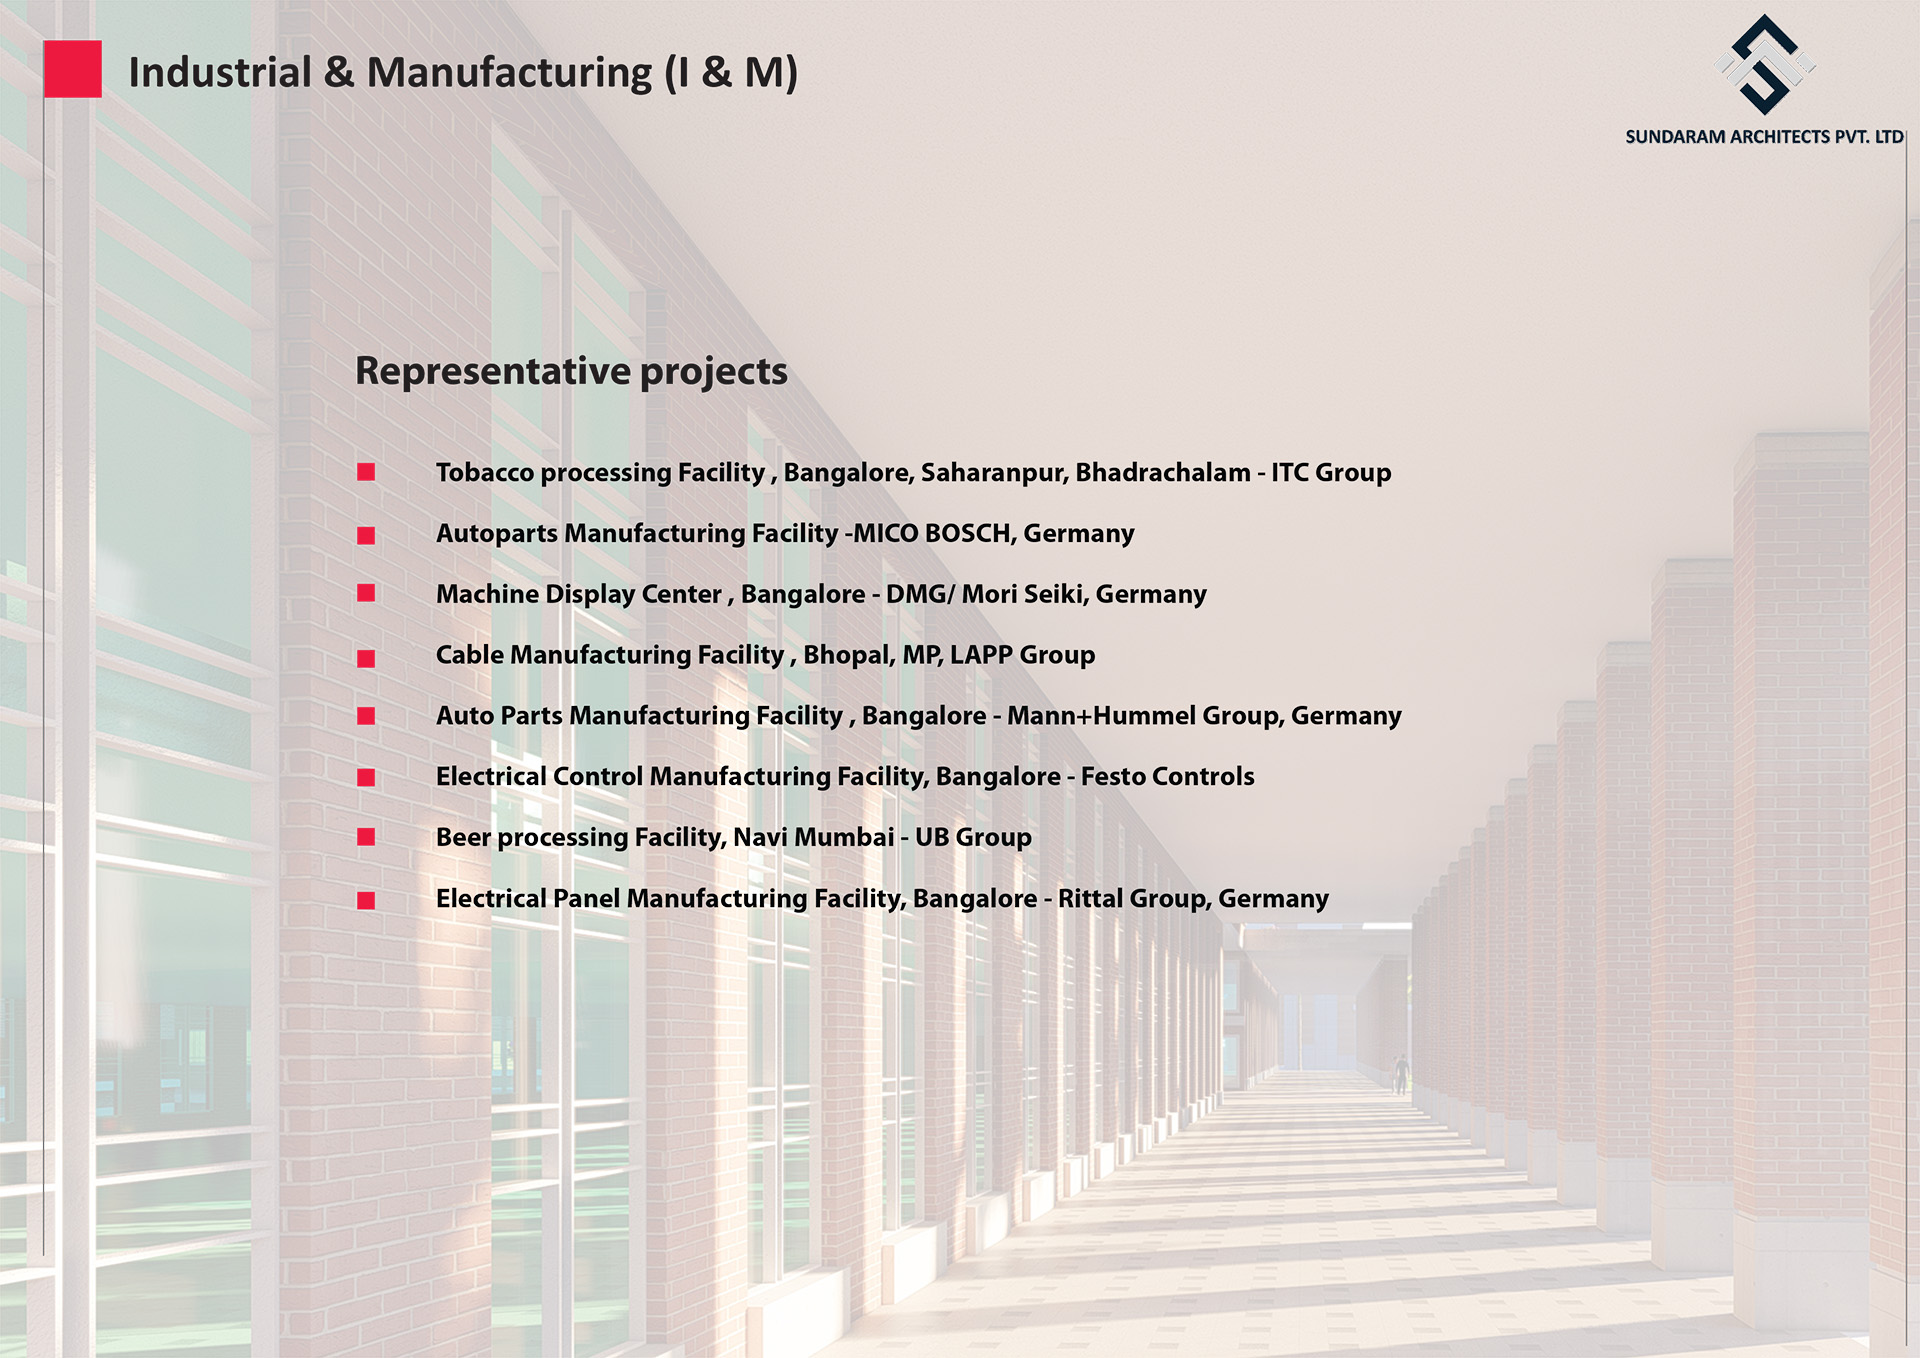 Industrial & Manufacturing projects which are well designed by Sundaram Architects